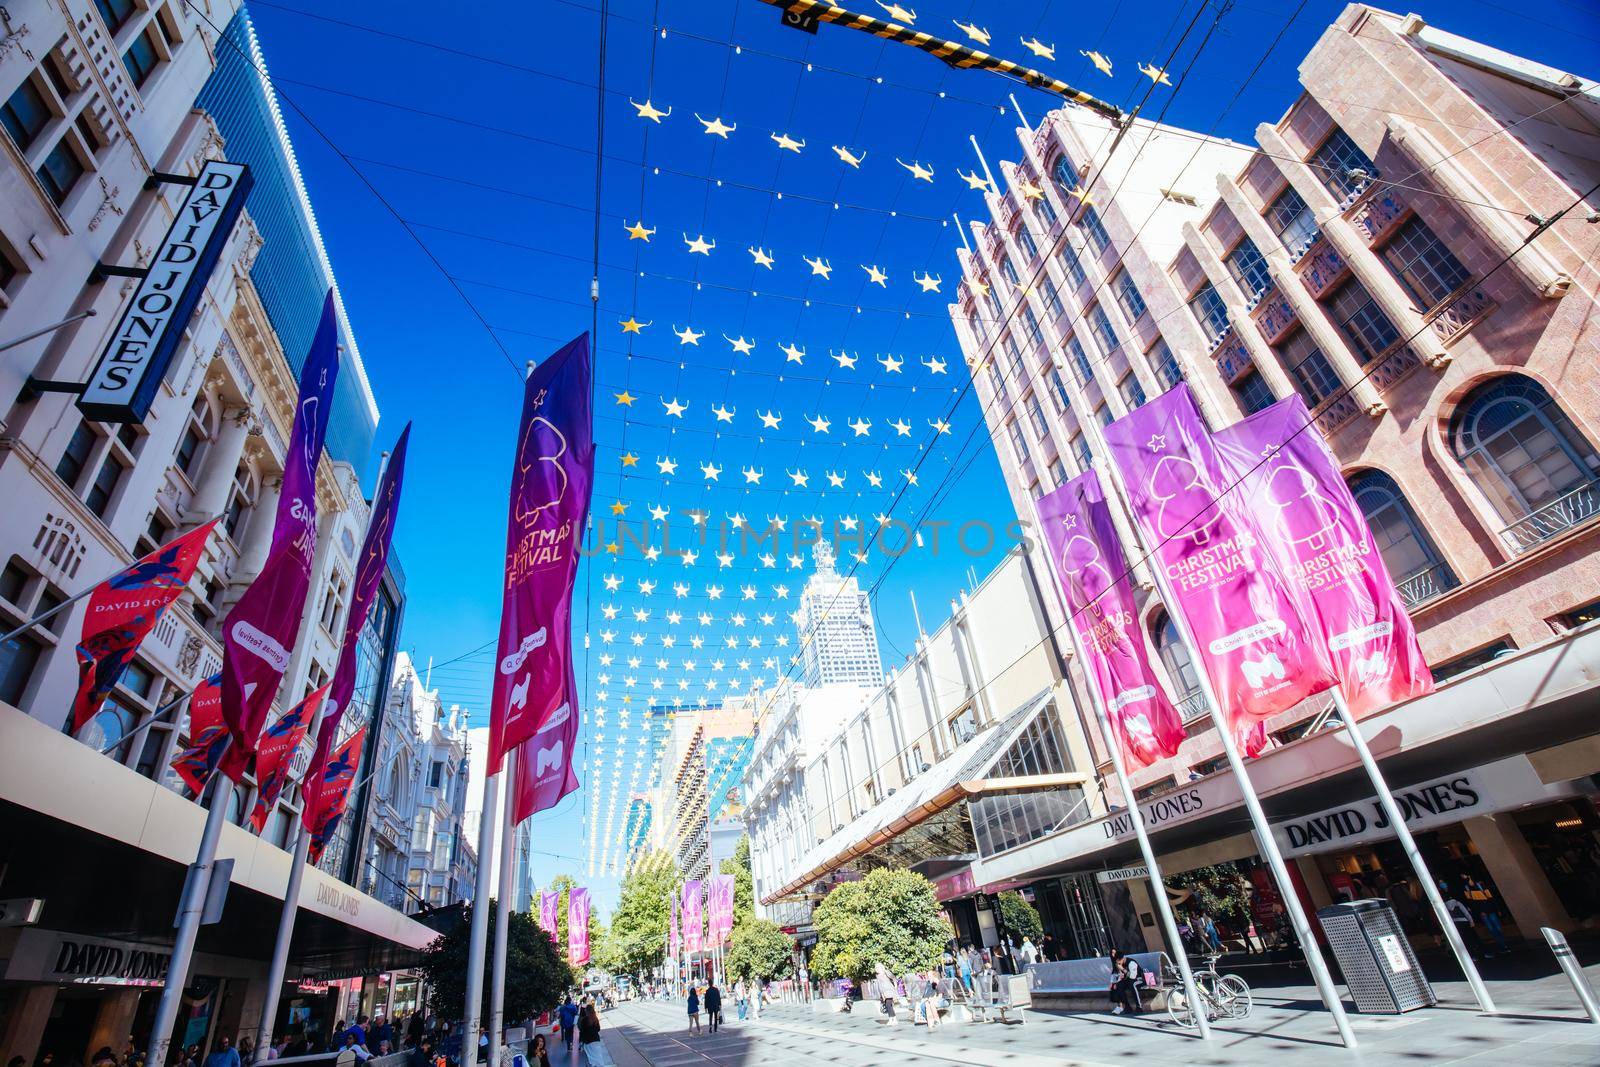 Bourke St Mall at Christmas in Australia by FiledIMAGE